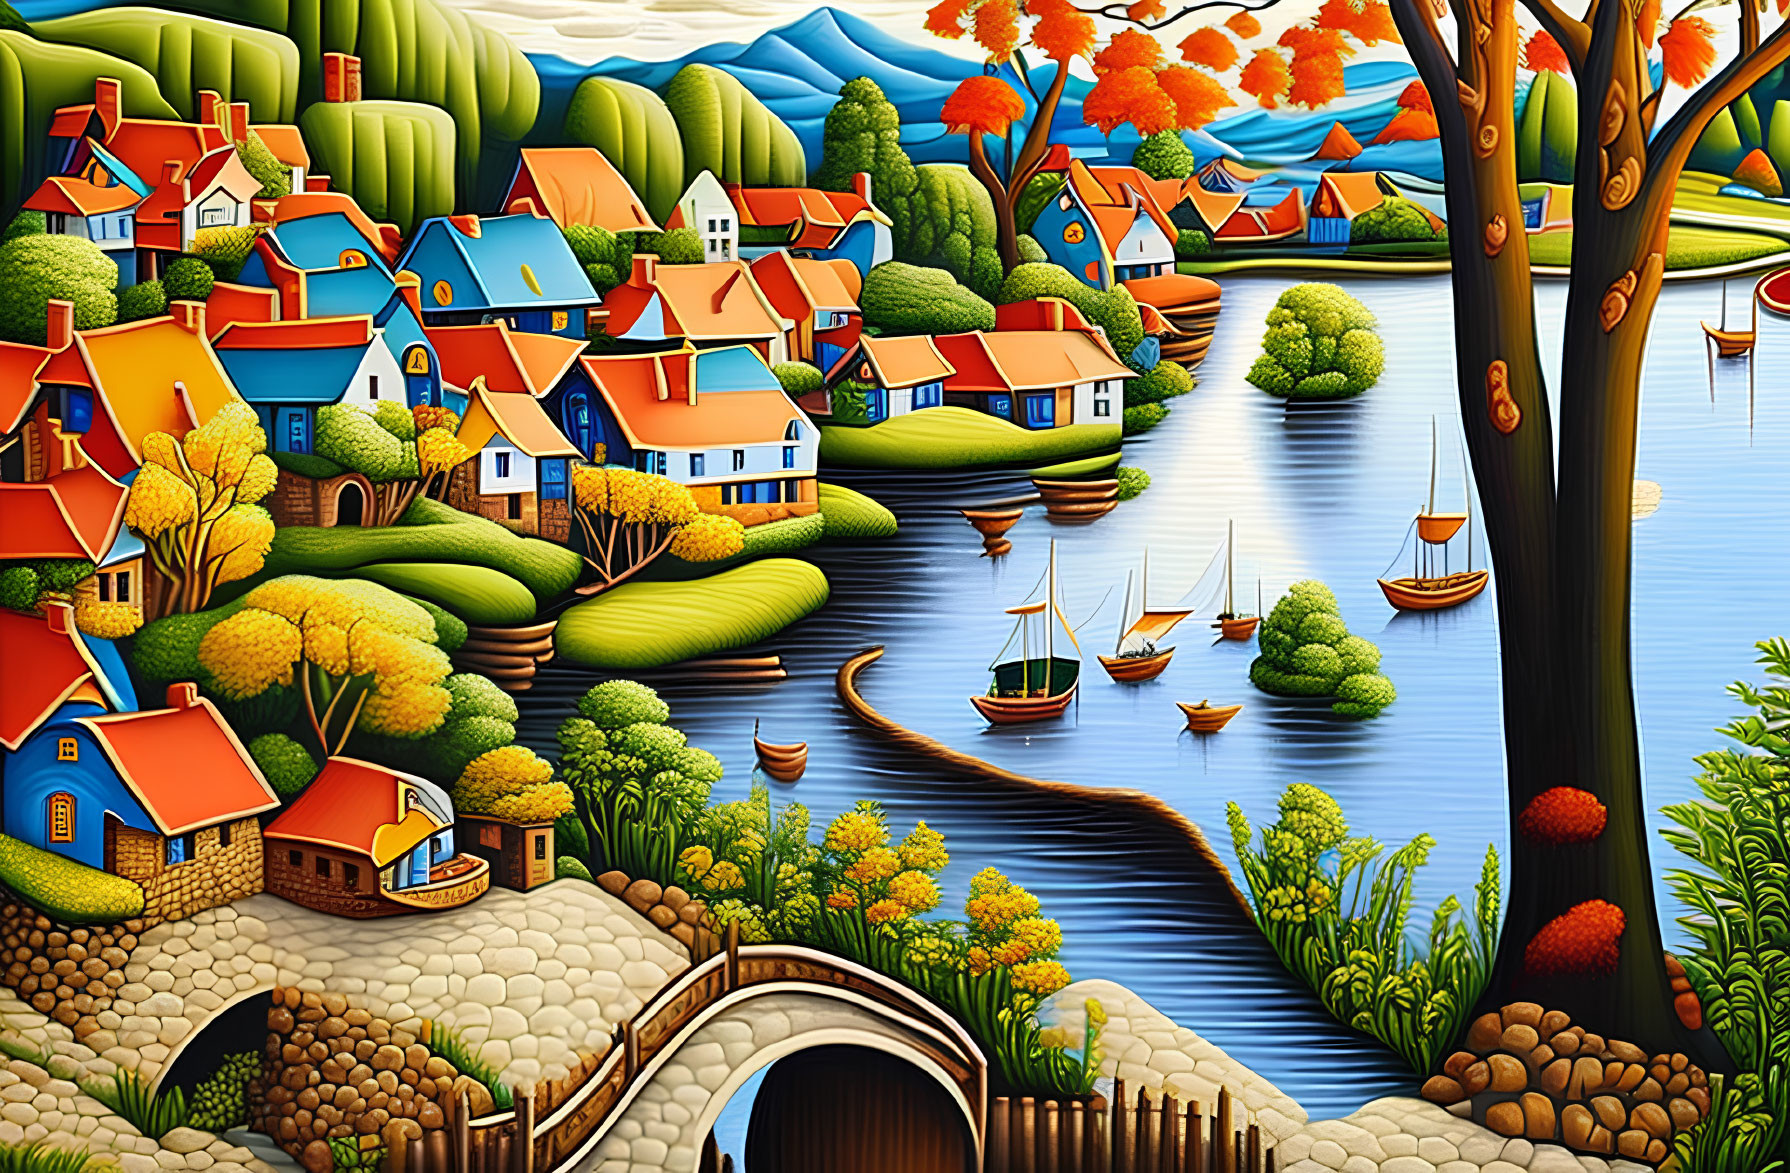 Colorful Artwork of Whimsical Village with River and Stone Bridge